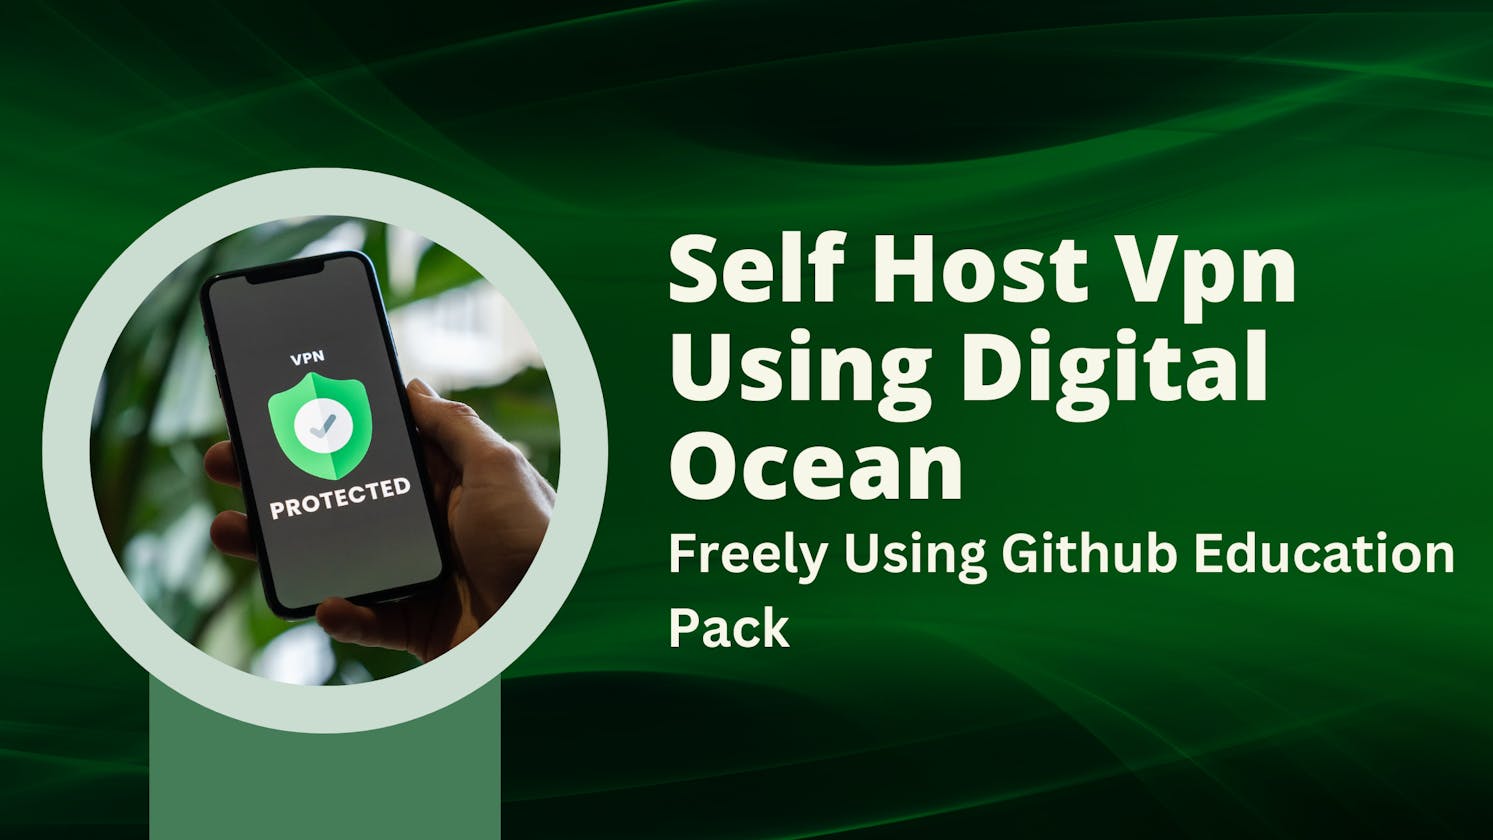 How to setup self hosted free vpn with github education pack